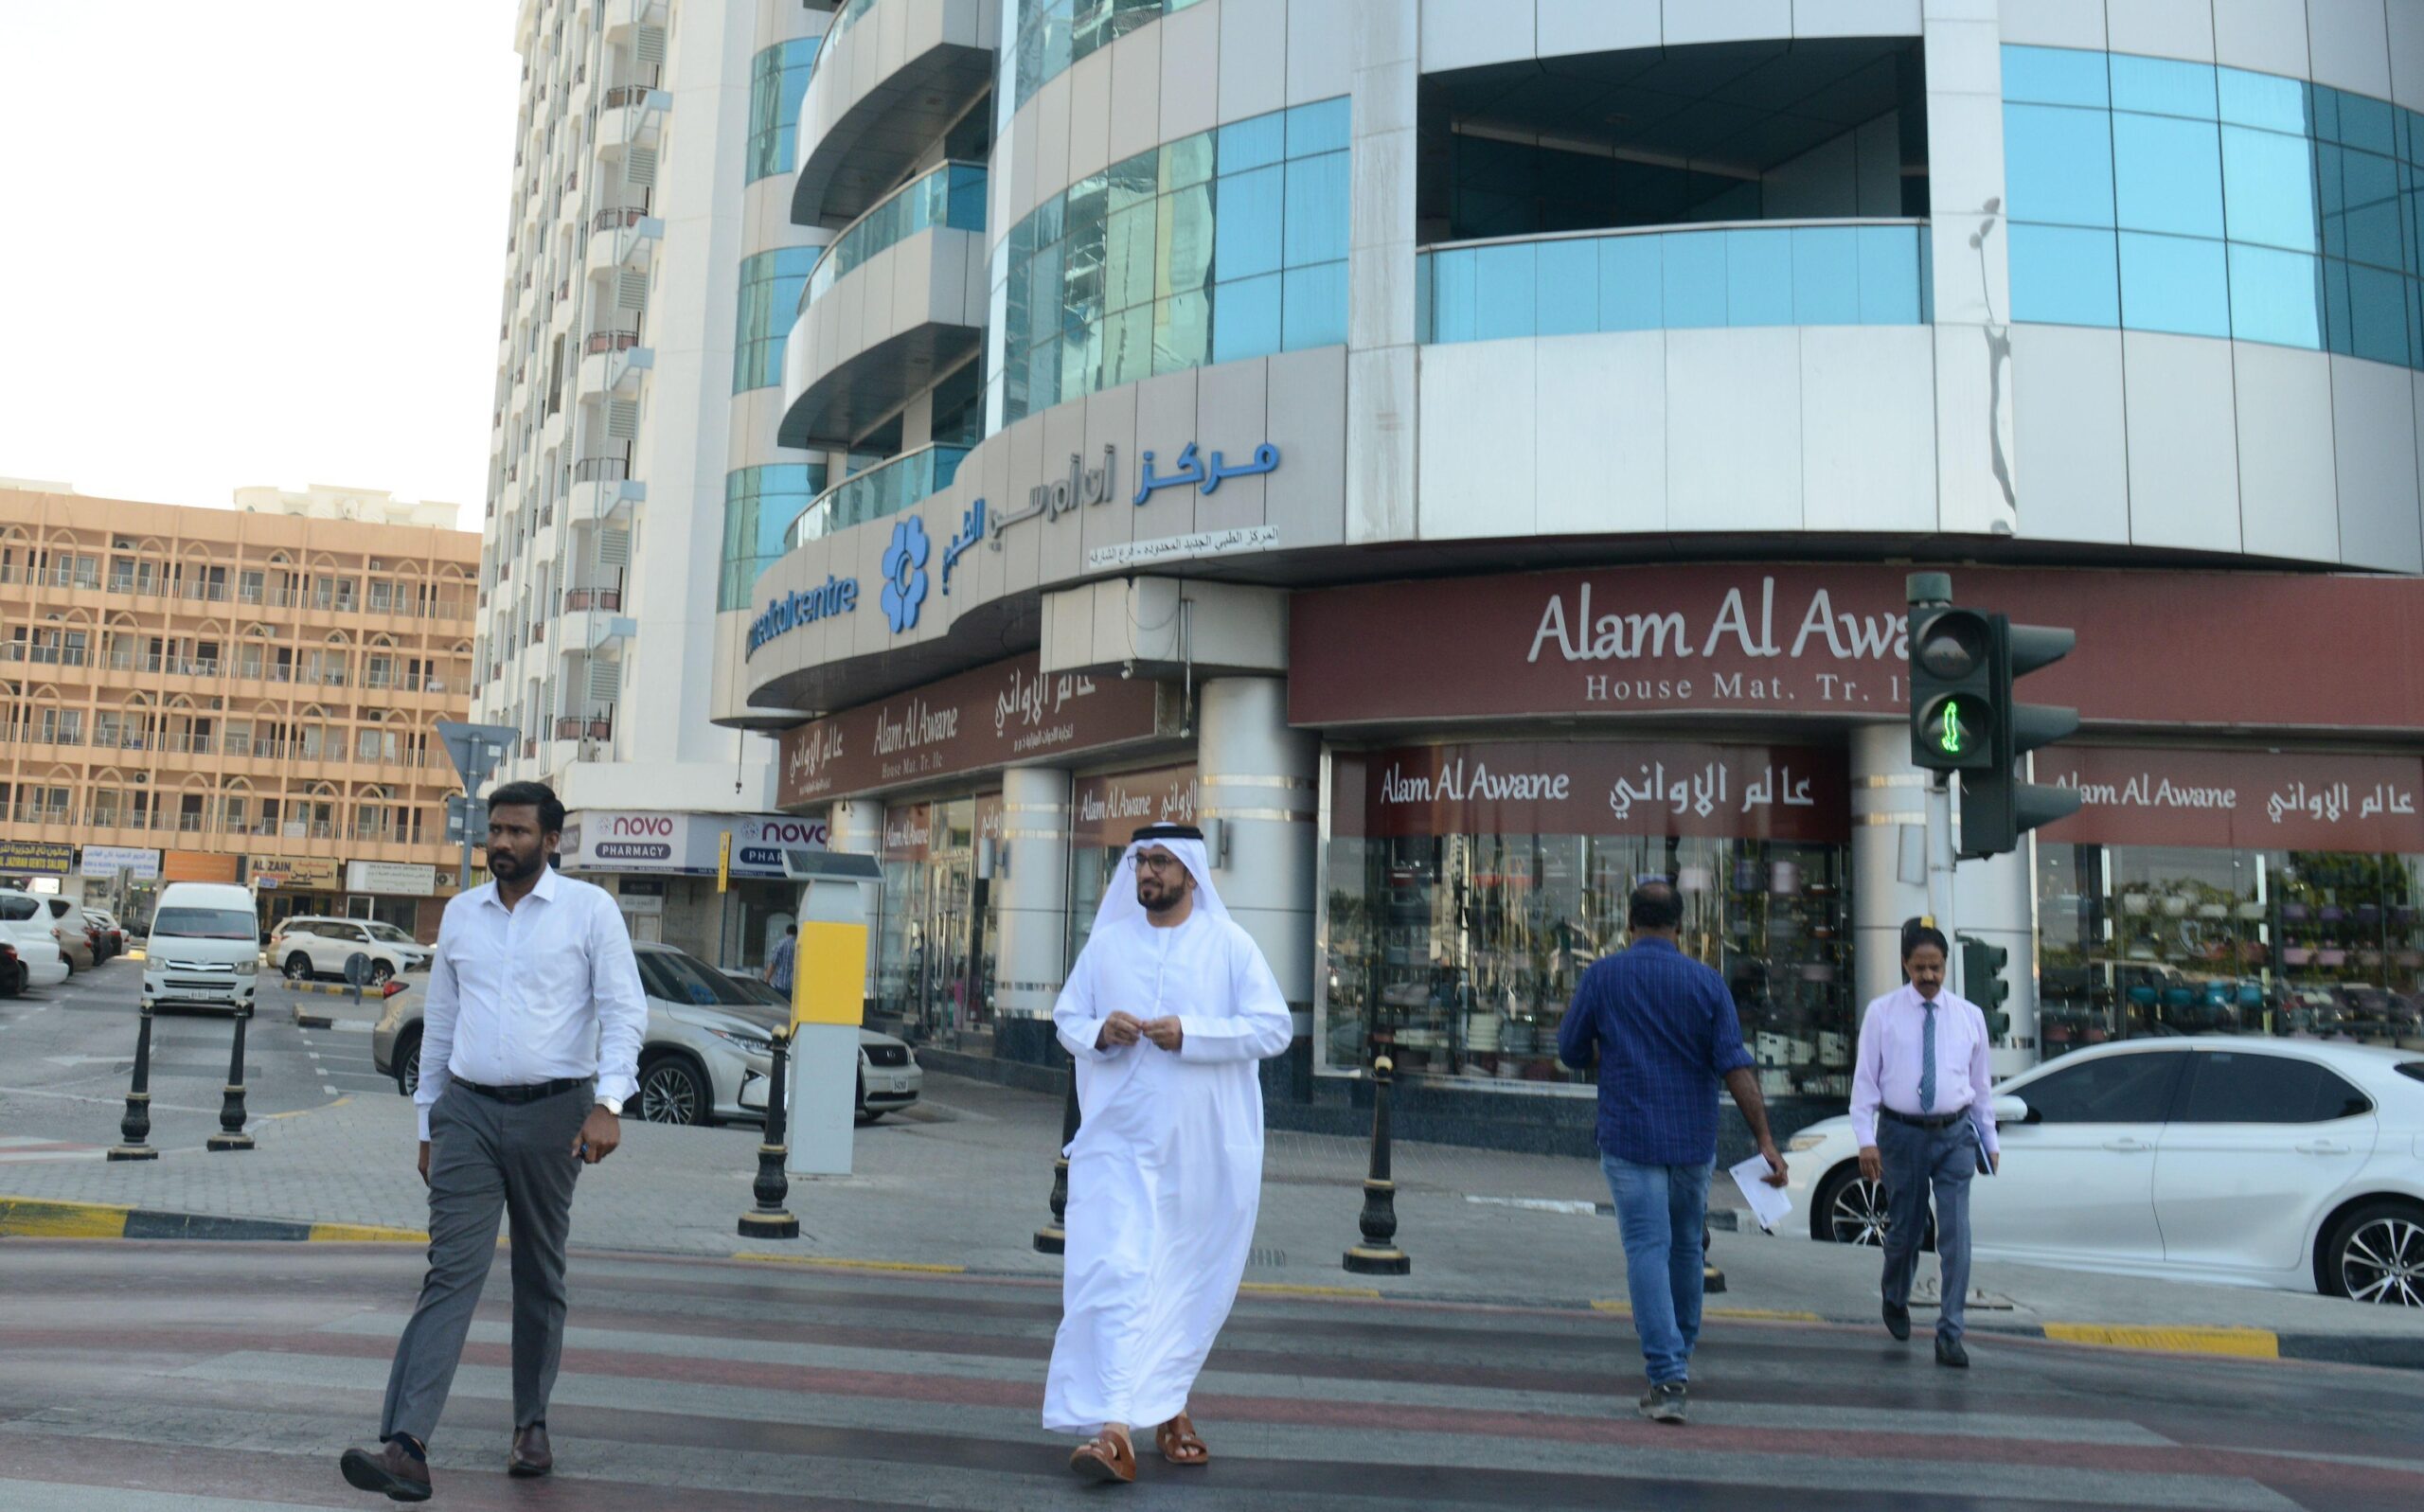 Pedestrians cross a road in Sharjah. The emirate is the UAE's 'manufacturing base', according to an official